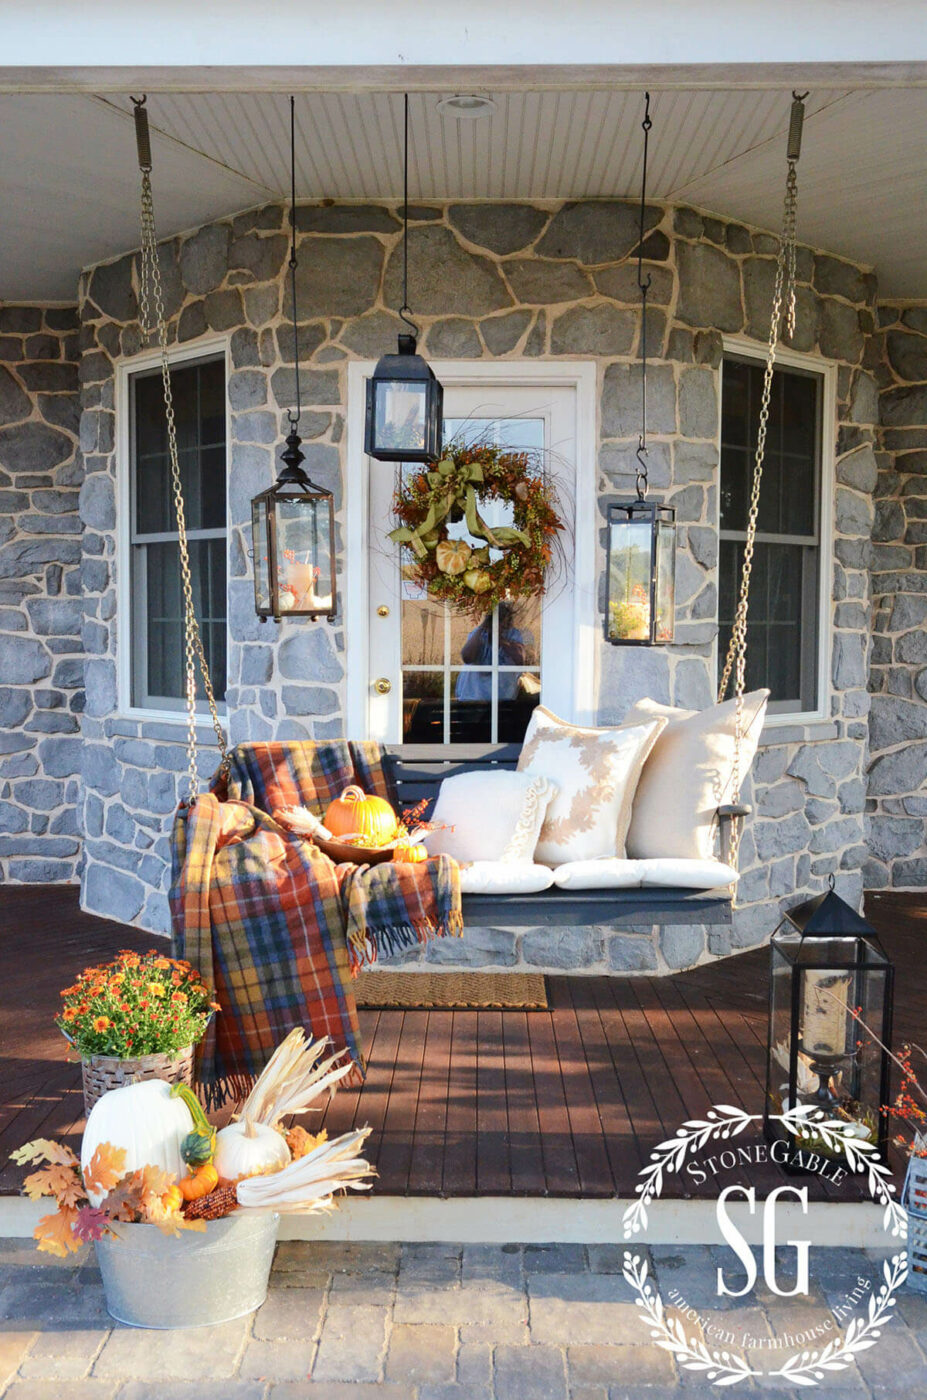 Accessories Transform Your Porch Swing for Fall